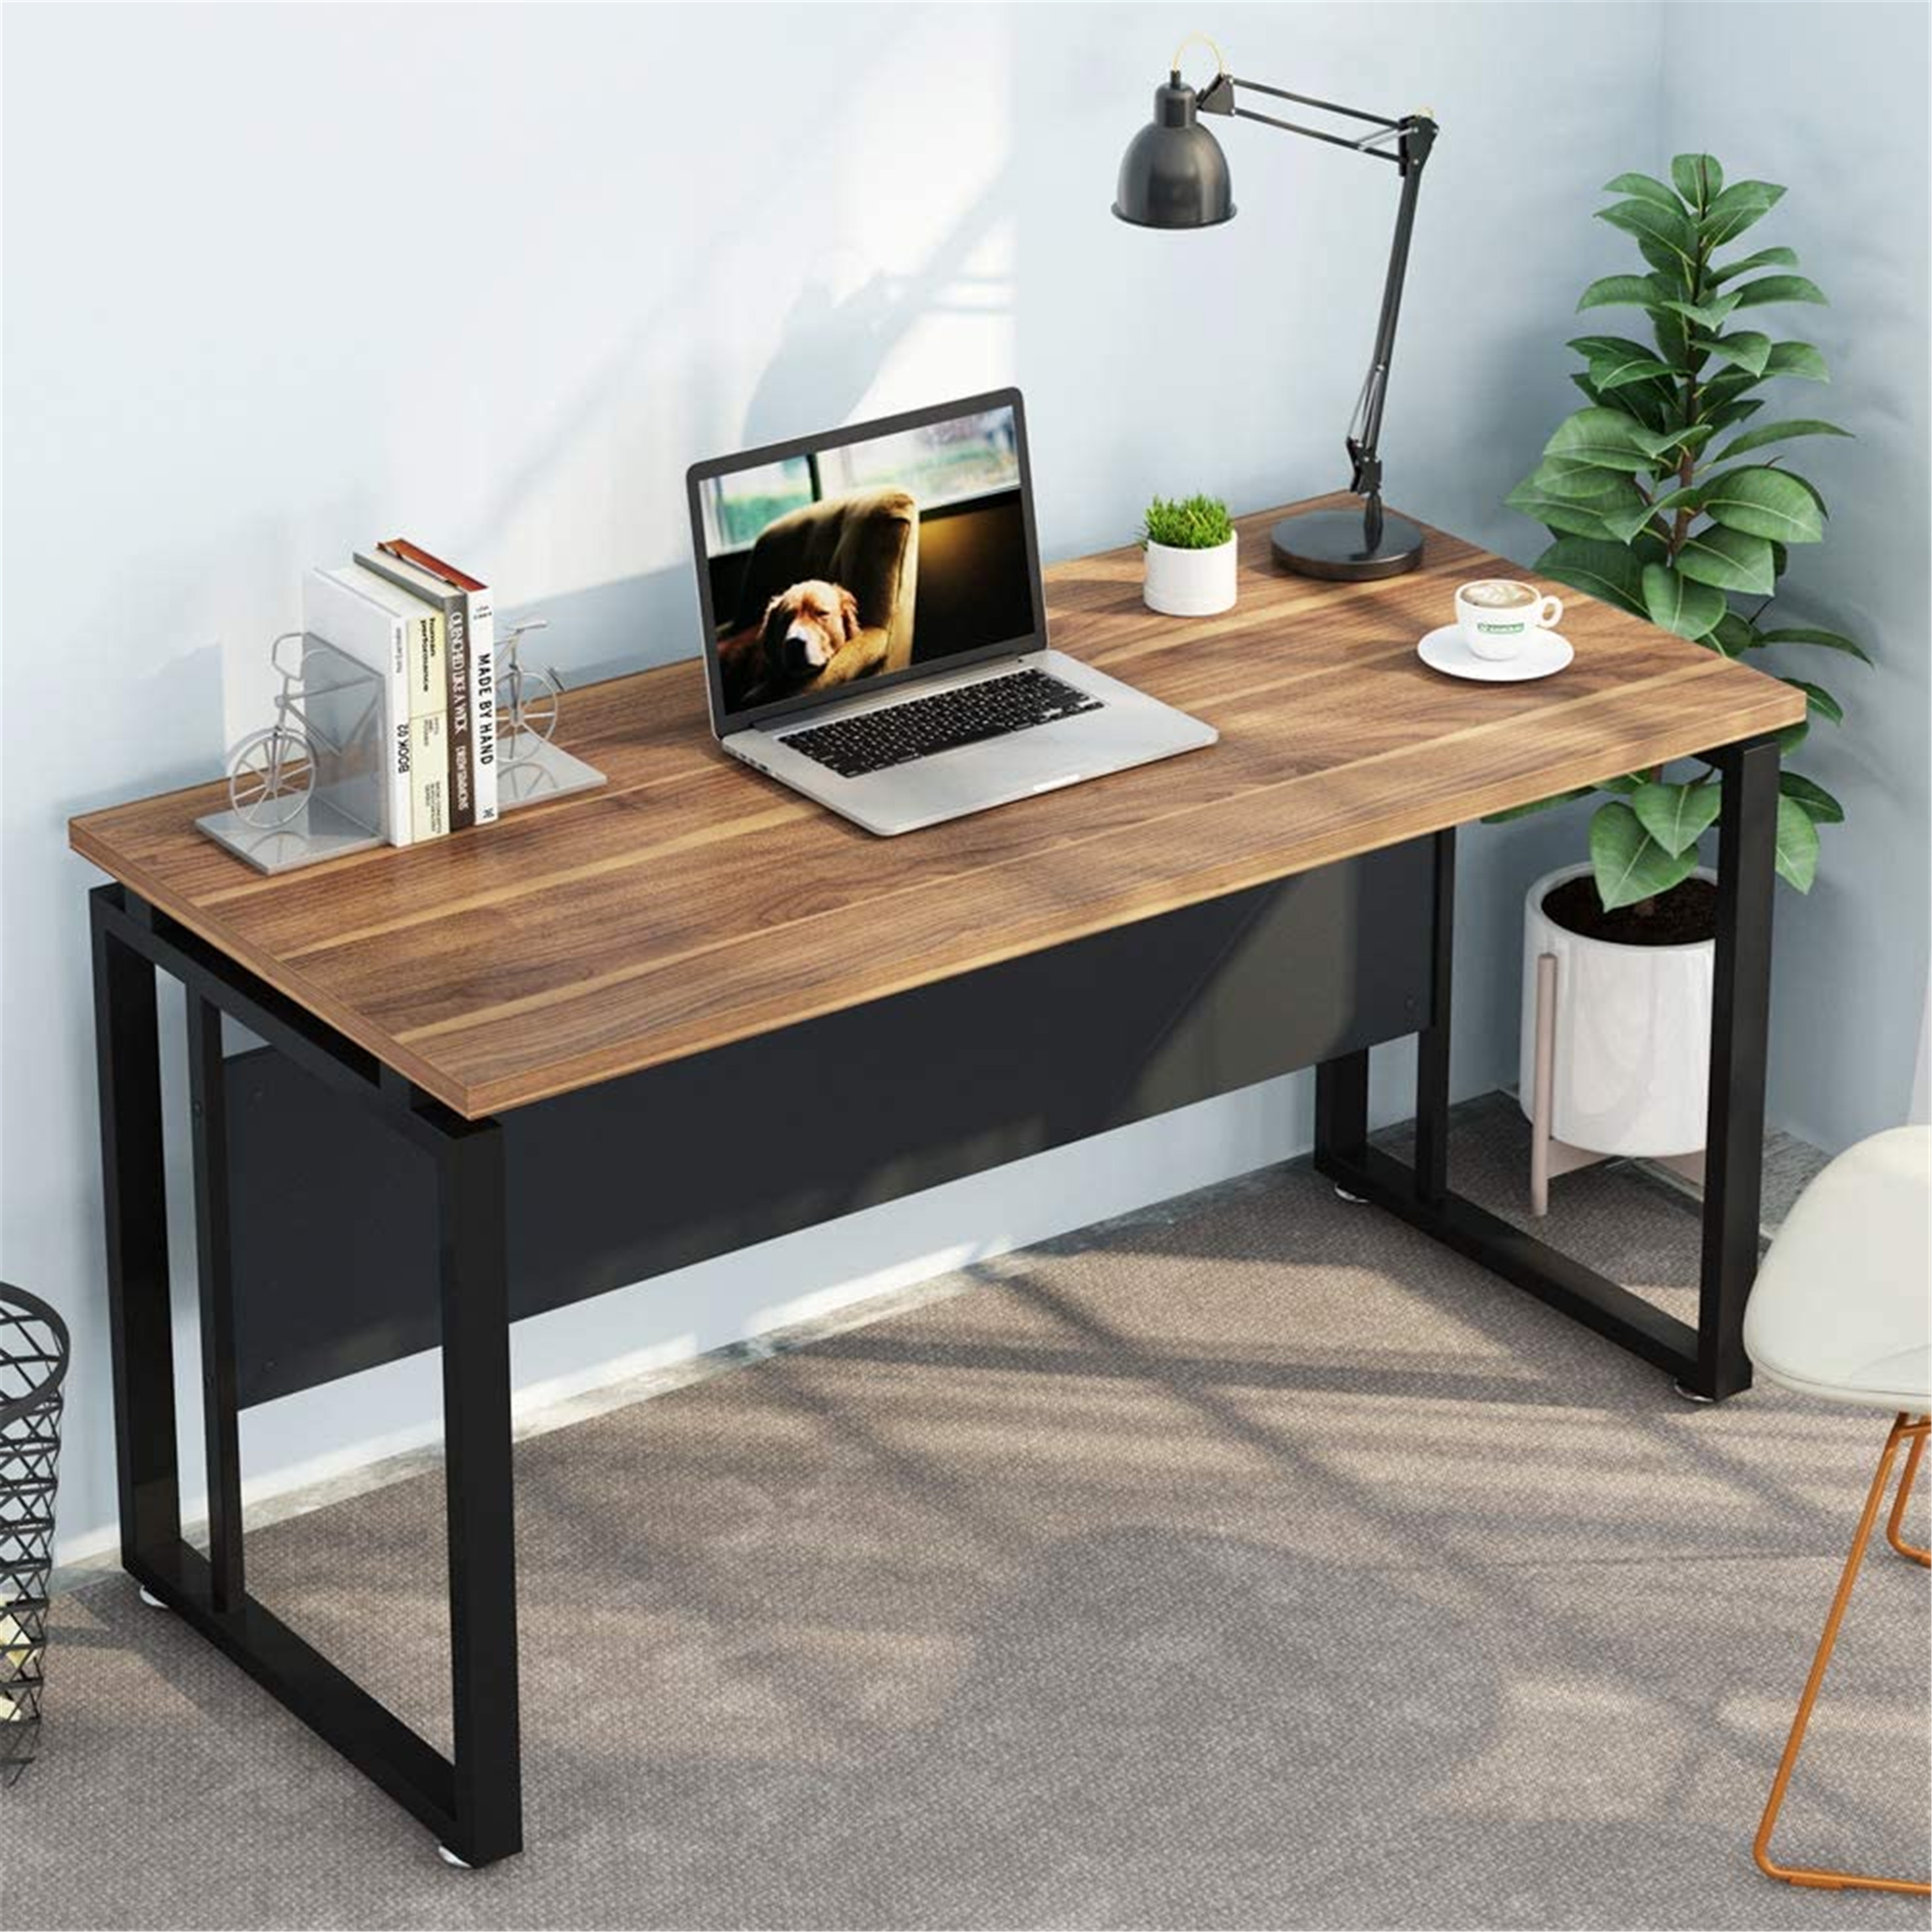 https://ak1.ostkcdn.com/images/products/is/images/direct/bef60b9c513eb991946fe19fe574ebc436926c16/L-Shaped-Computer-Desk%2C-55-inch-Home-Office-Desk.jpg